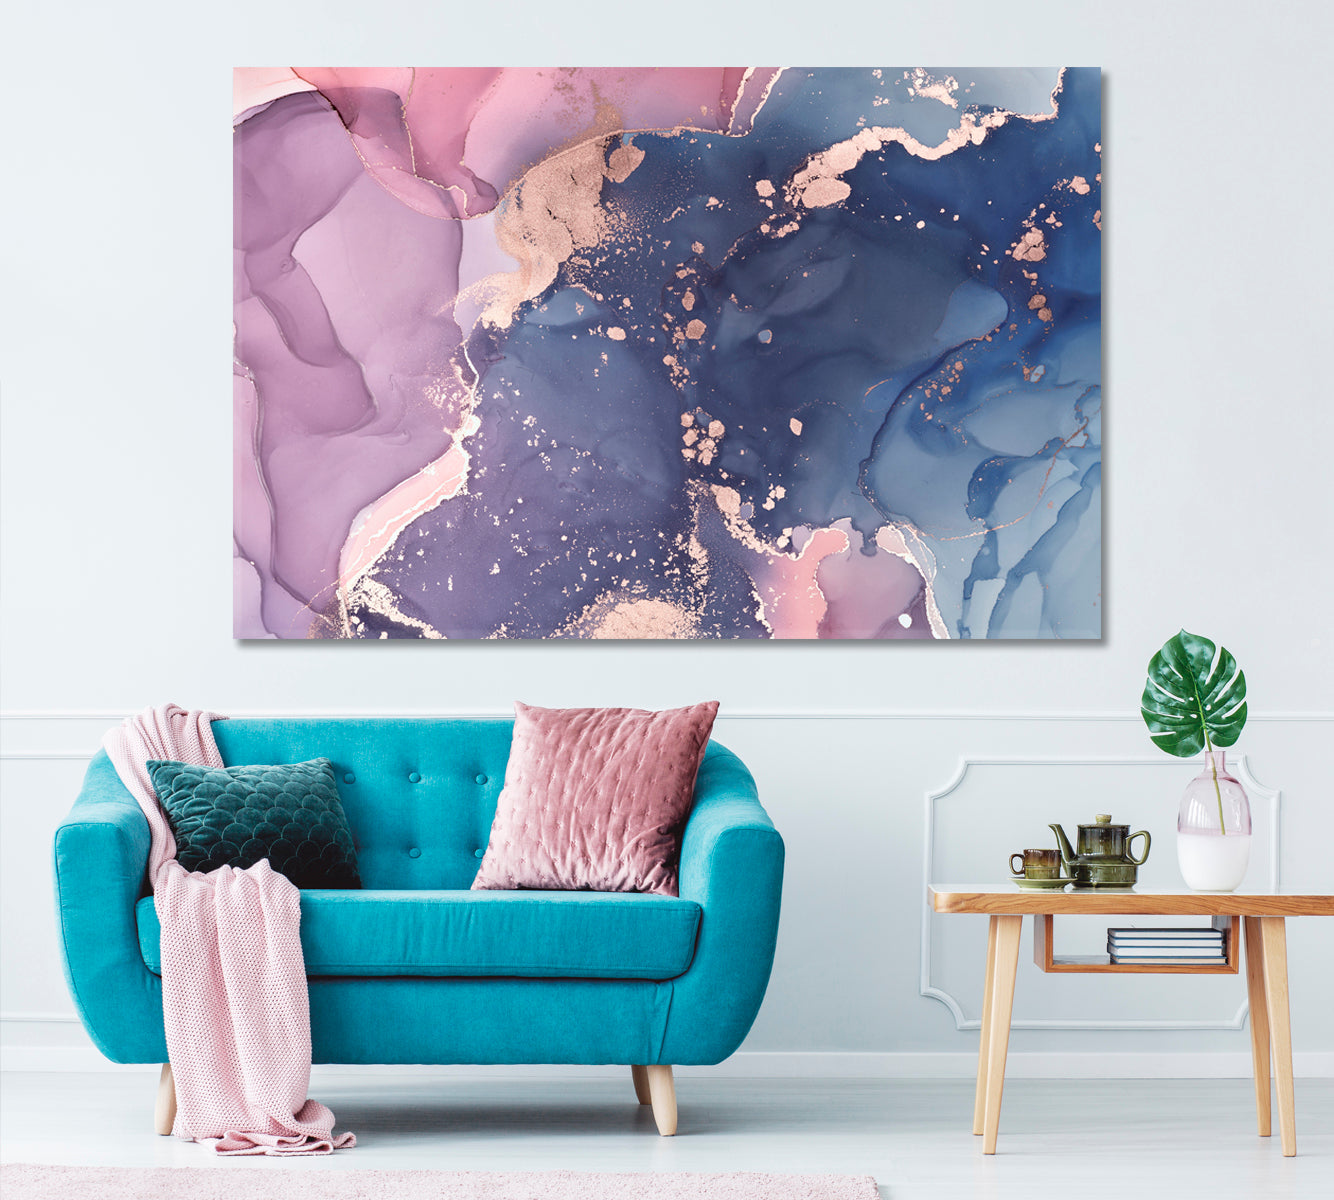 Abstract Mixed Blue & Pink Ink Pattern Canvas Print ArtLexy 1 Panel 24"x16" inches 